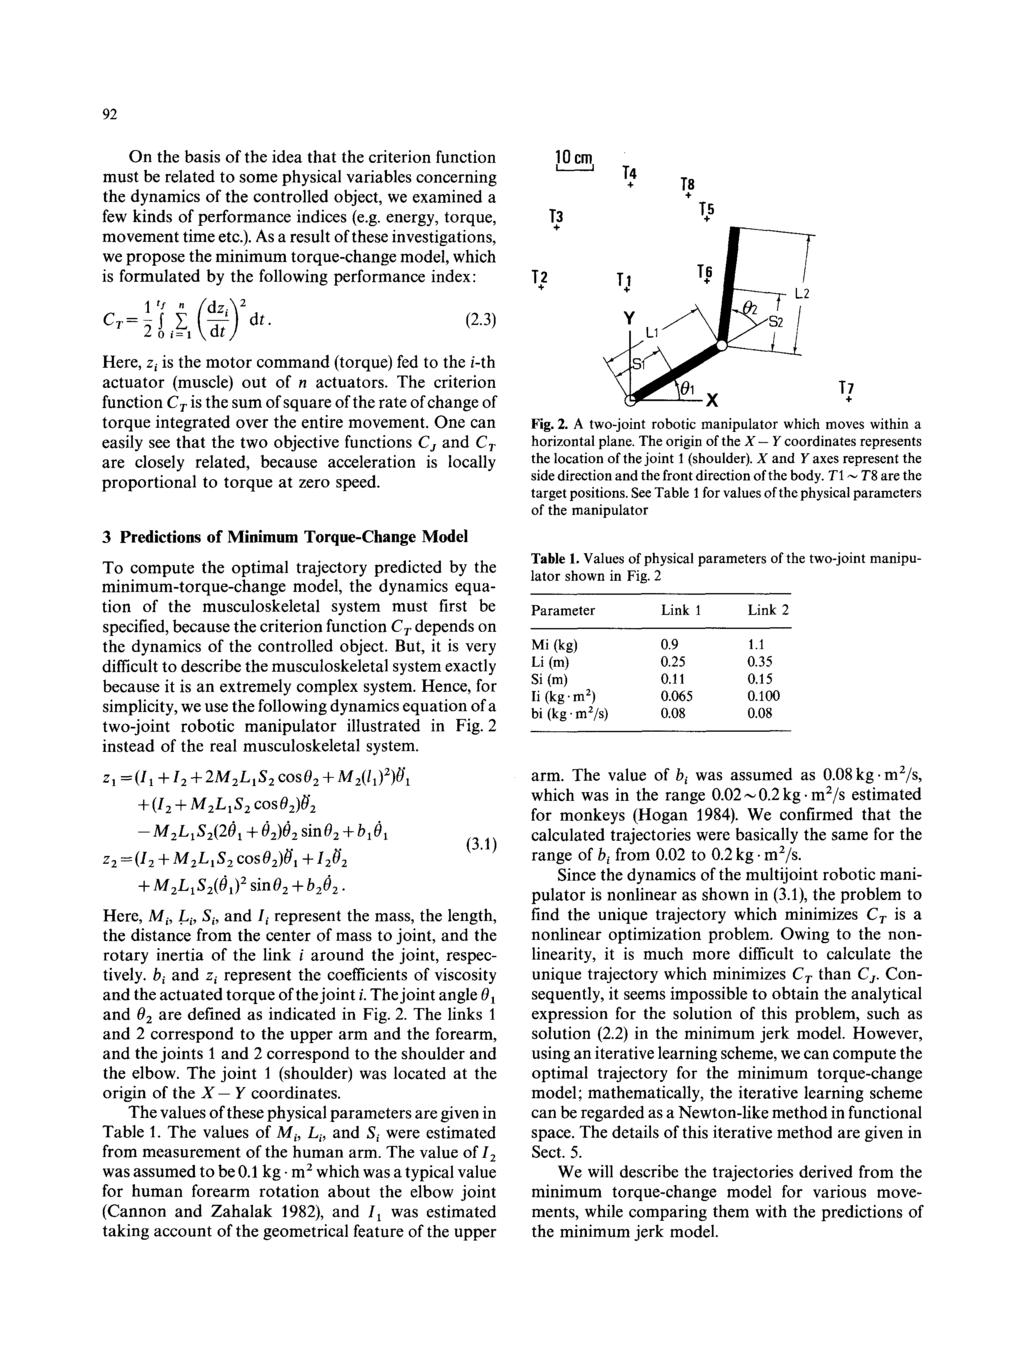 92 On the bsis of the ide tht the criterion function must be relted to some physicl vribles concerning the dynmics of the controlled object, we exmined few kinds of performnce indices (e.g. energy, torque, movement time etc.